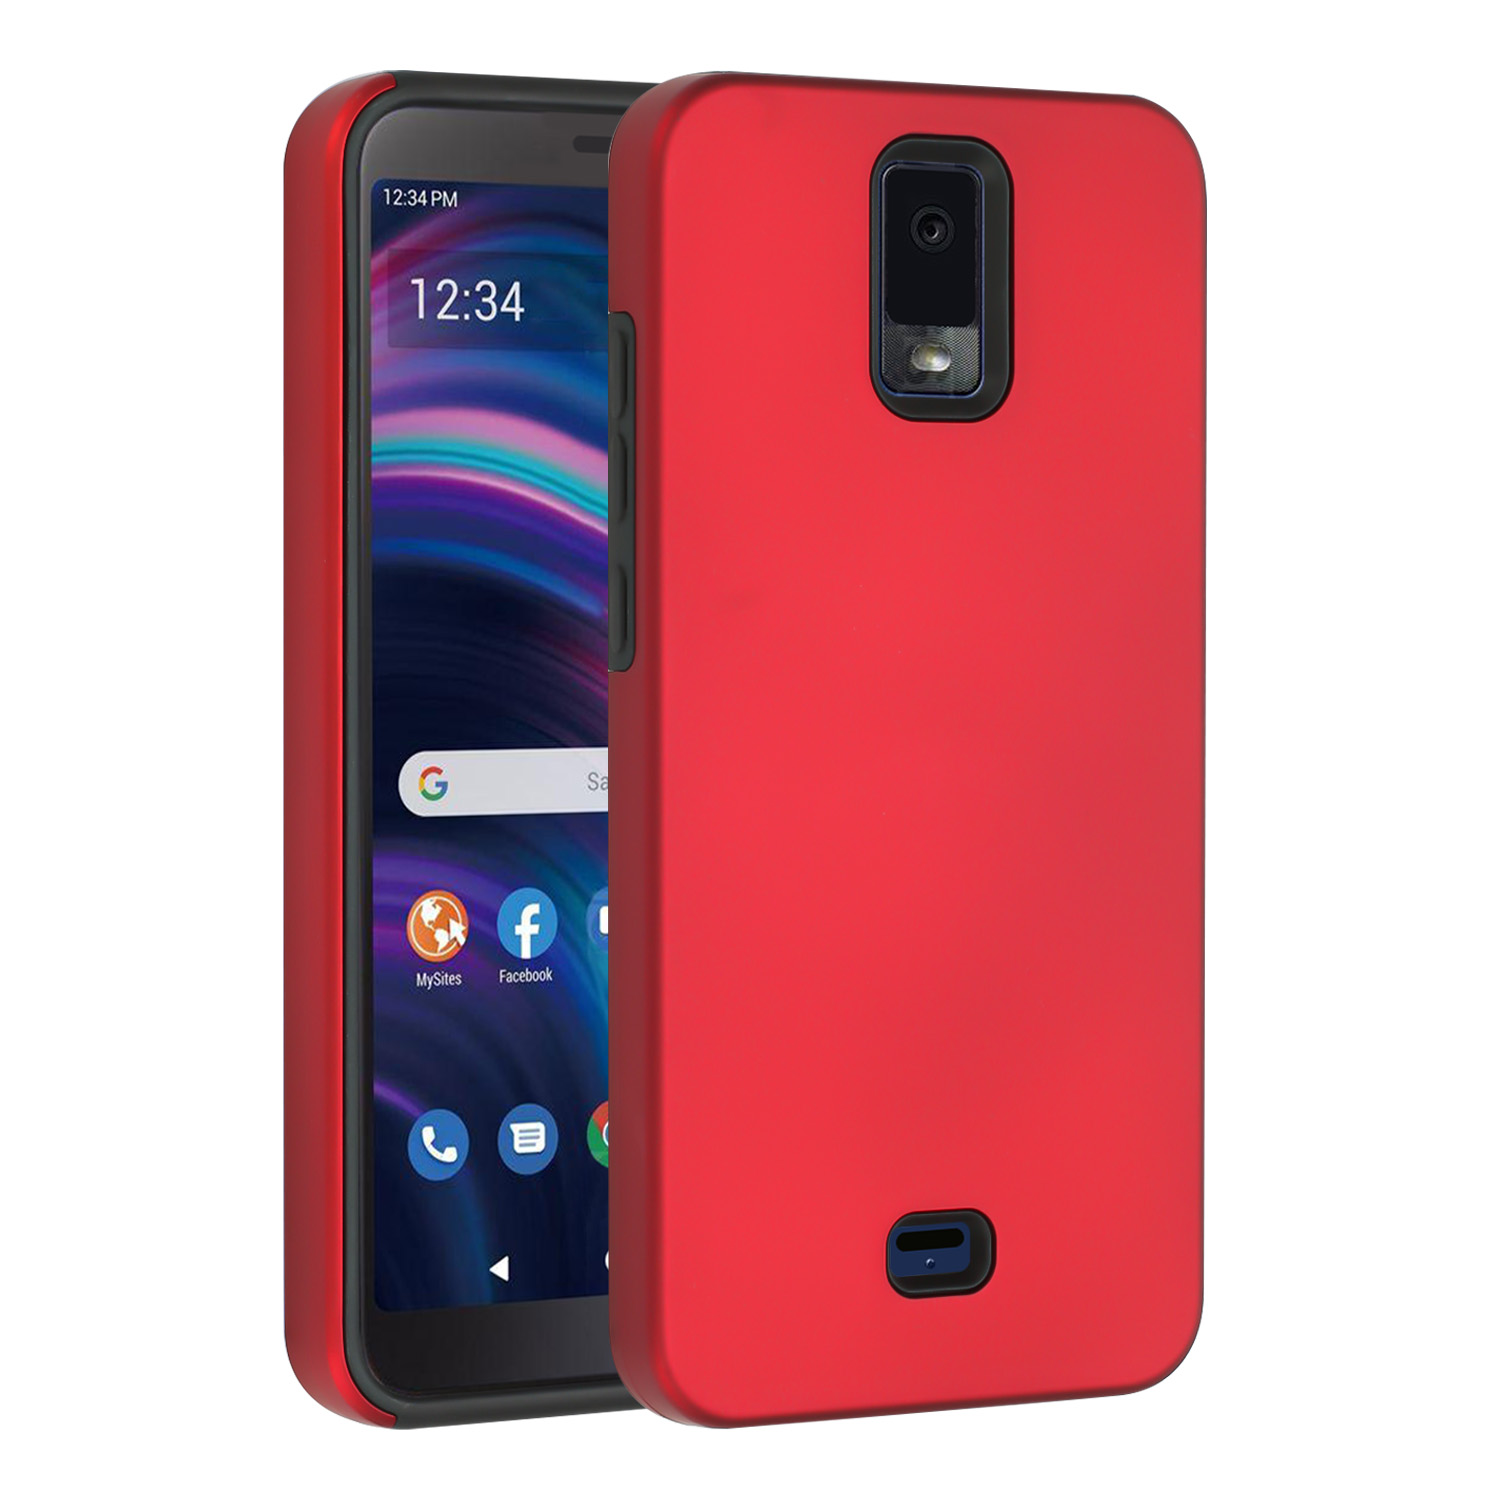 Glossy Dual Layer Armor Defender Hybrid Case Cover for BLU View 3 (Red)